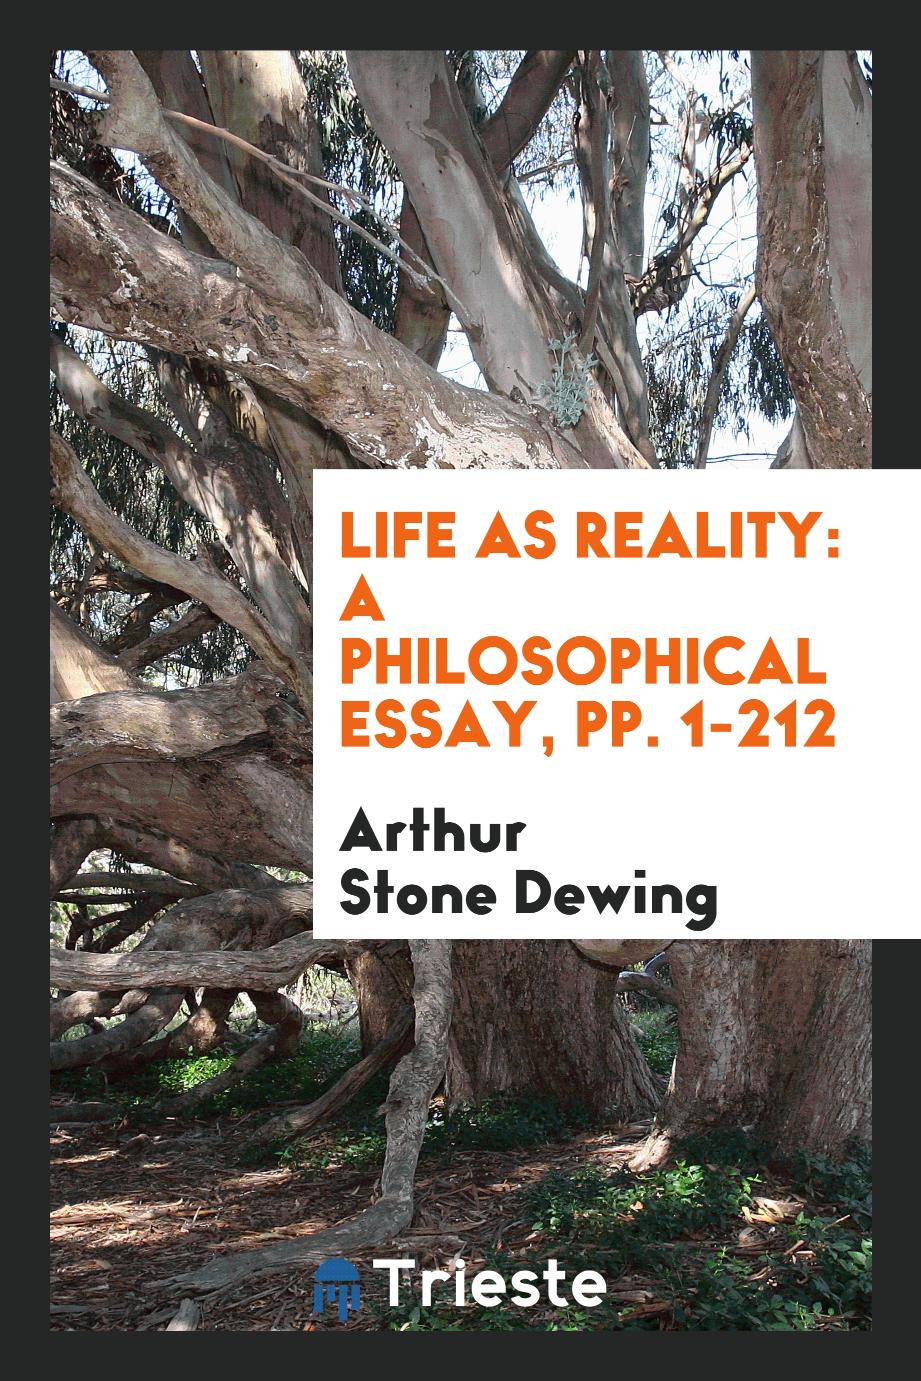 Life as Reality: A Philosophical Essay, pp. 1-212